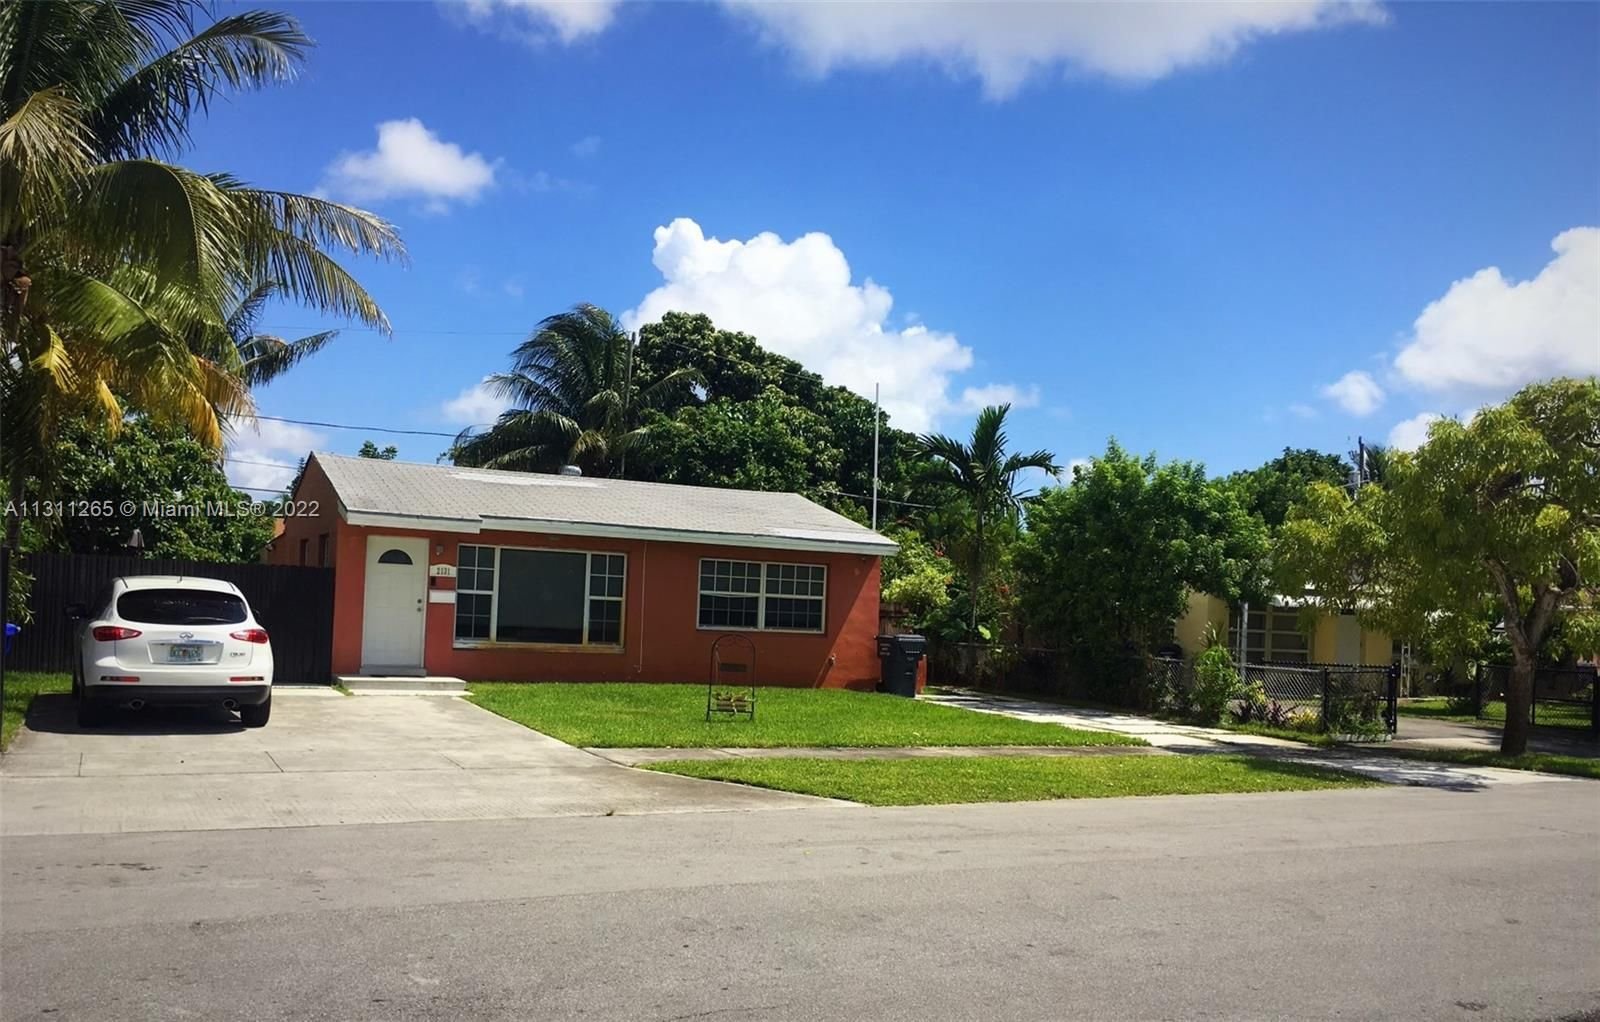 Real estate property located at 2131 Wiley Ct, Broward County, Hollywood, FL